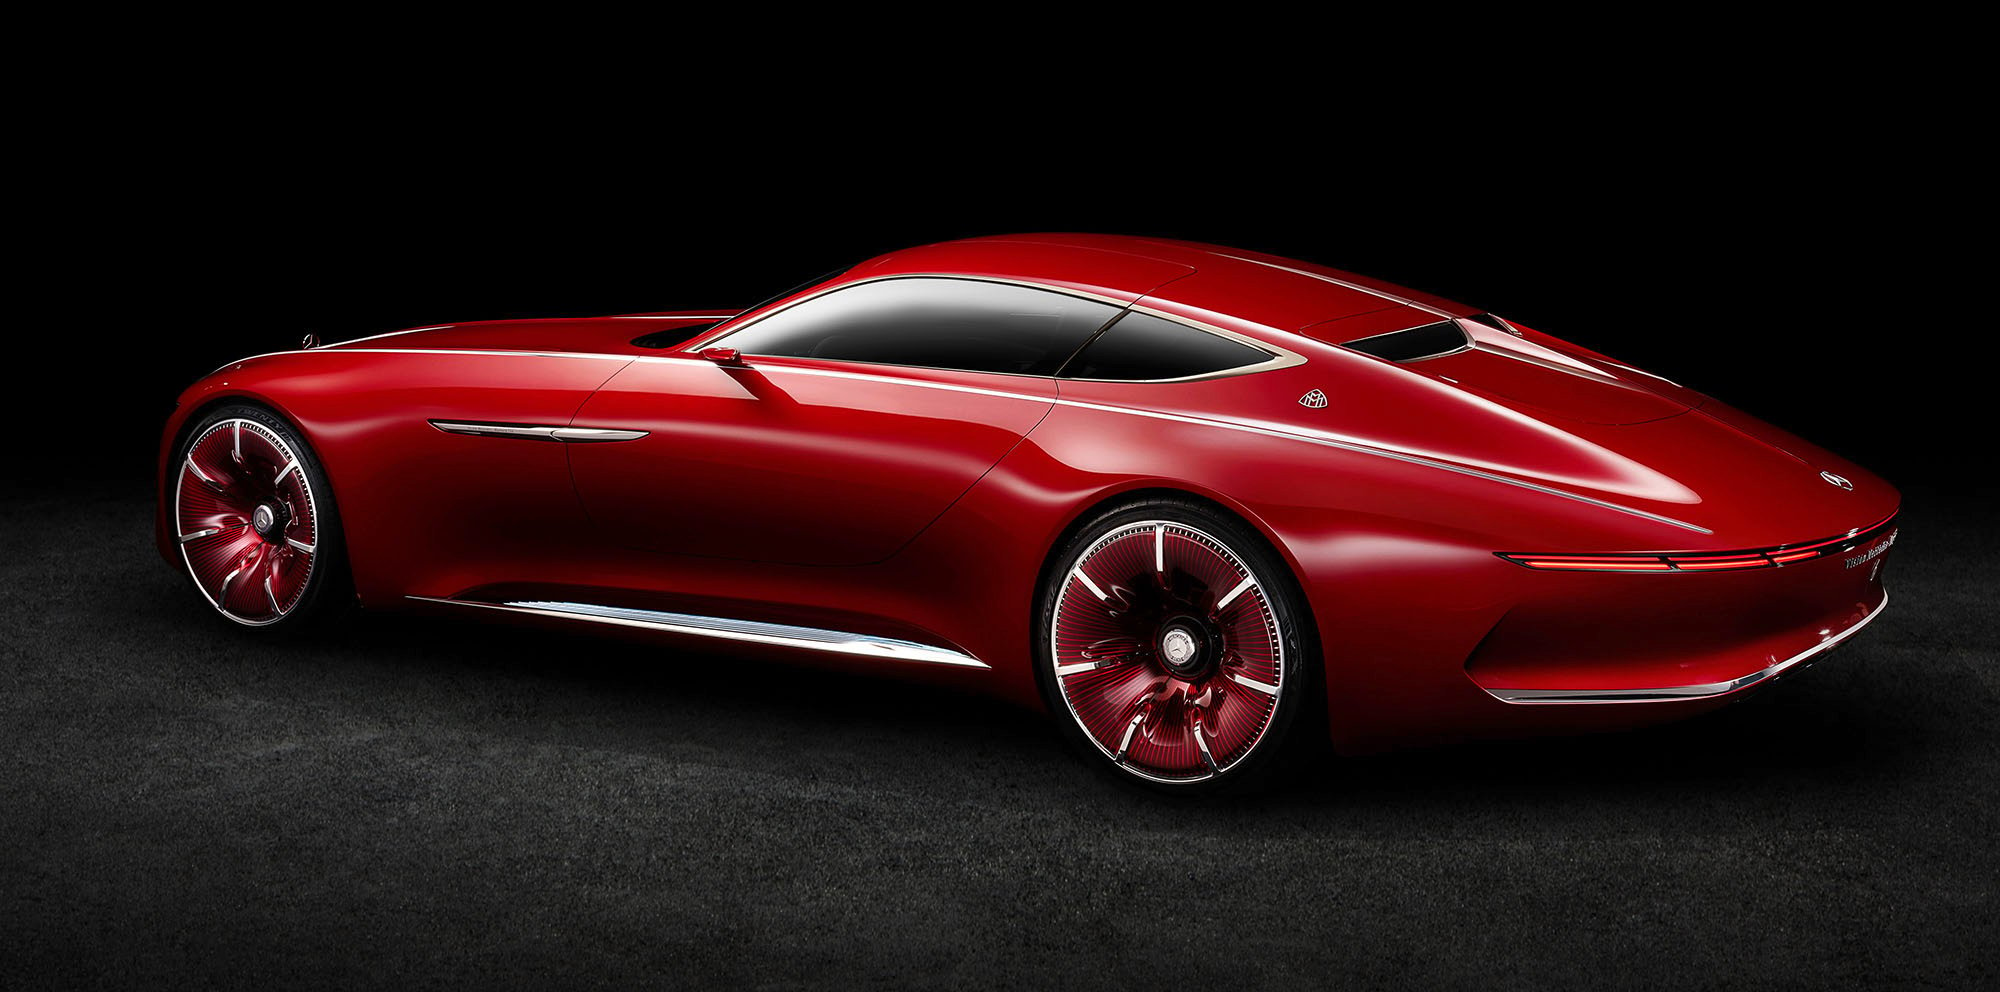 vision mercedes maybach 6 official rear